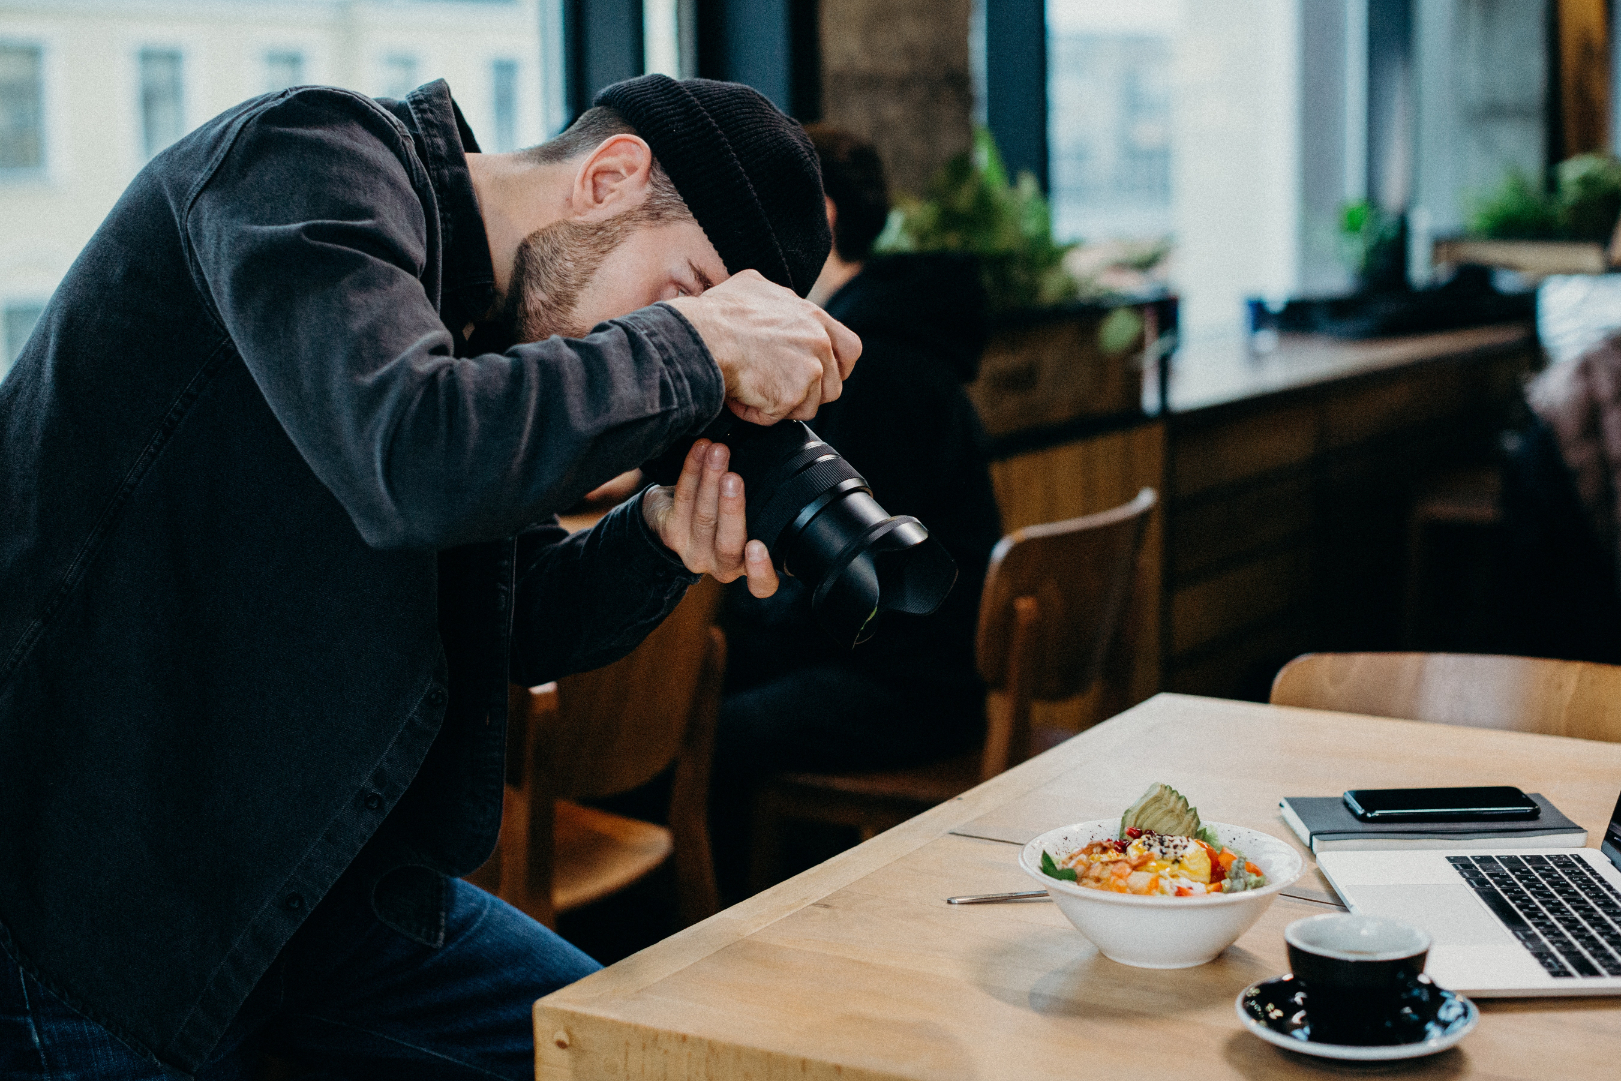 A professional photographer taking a photo of a bowl of food 